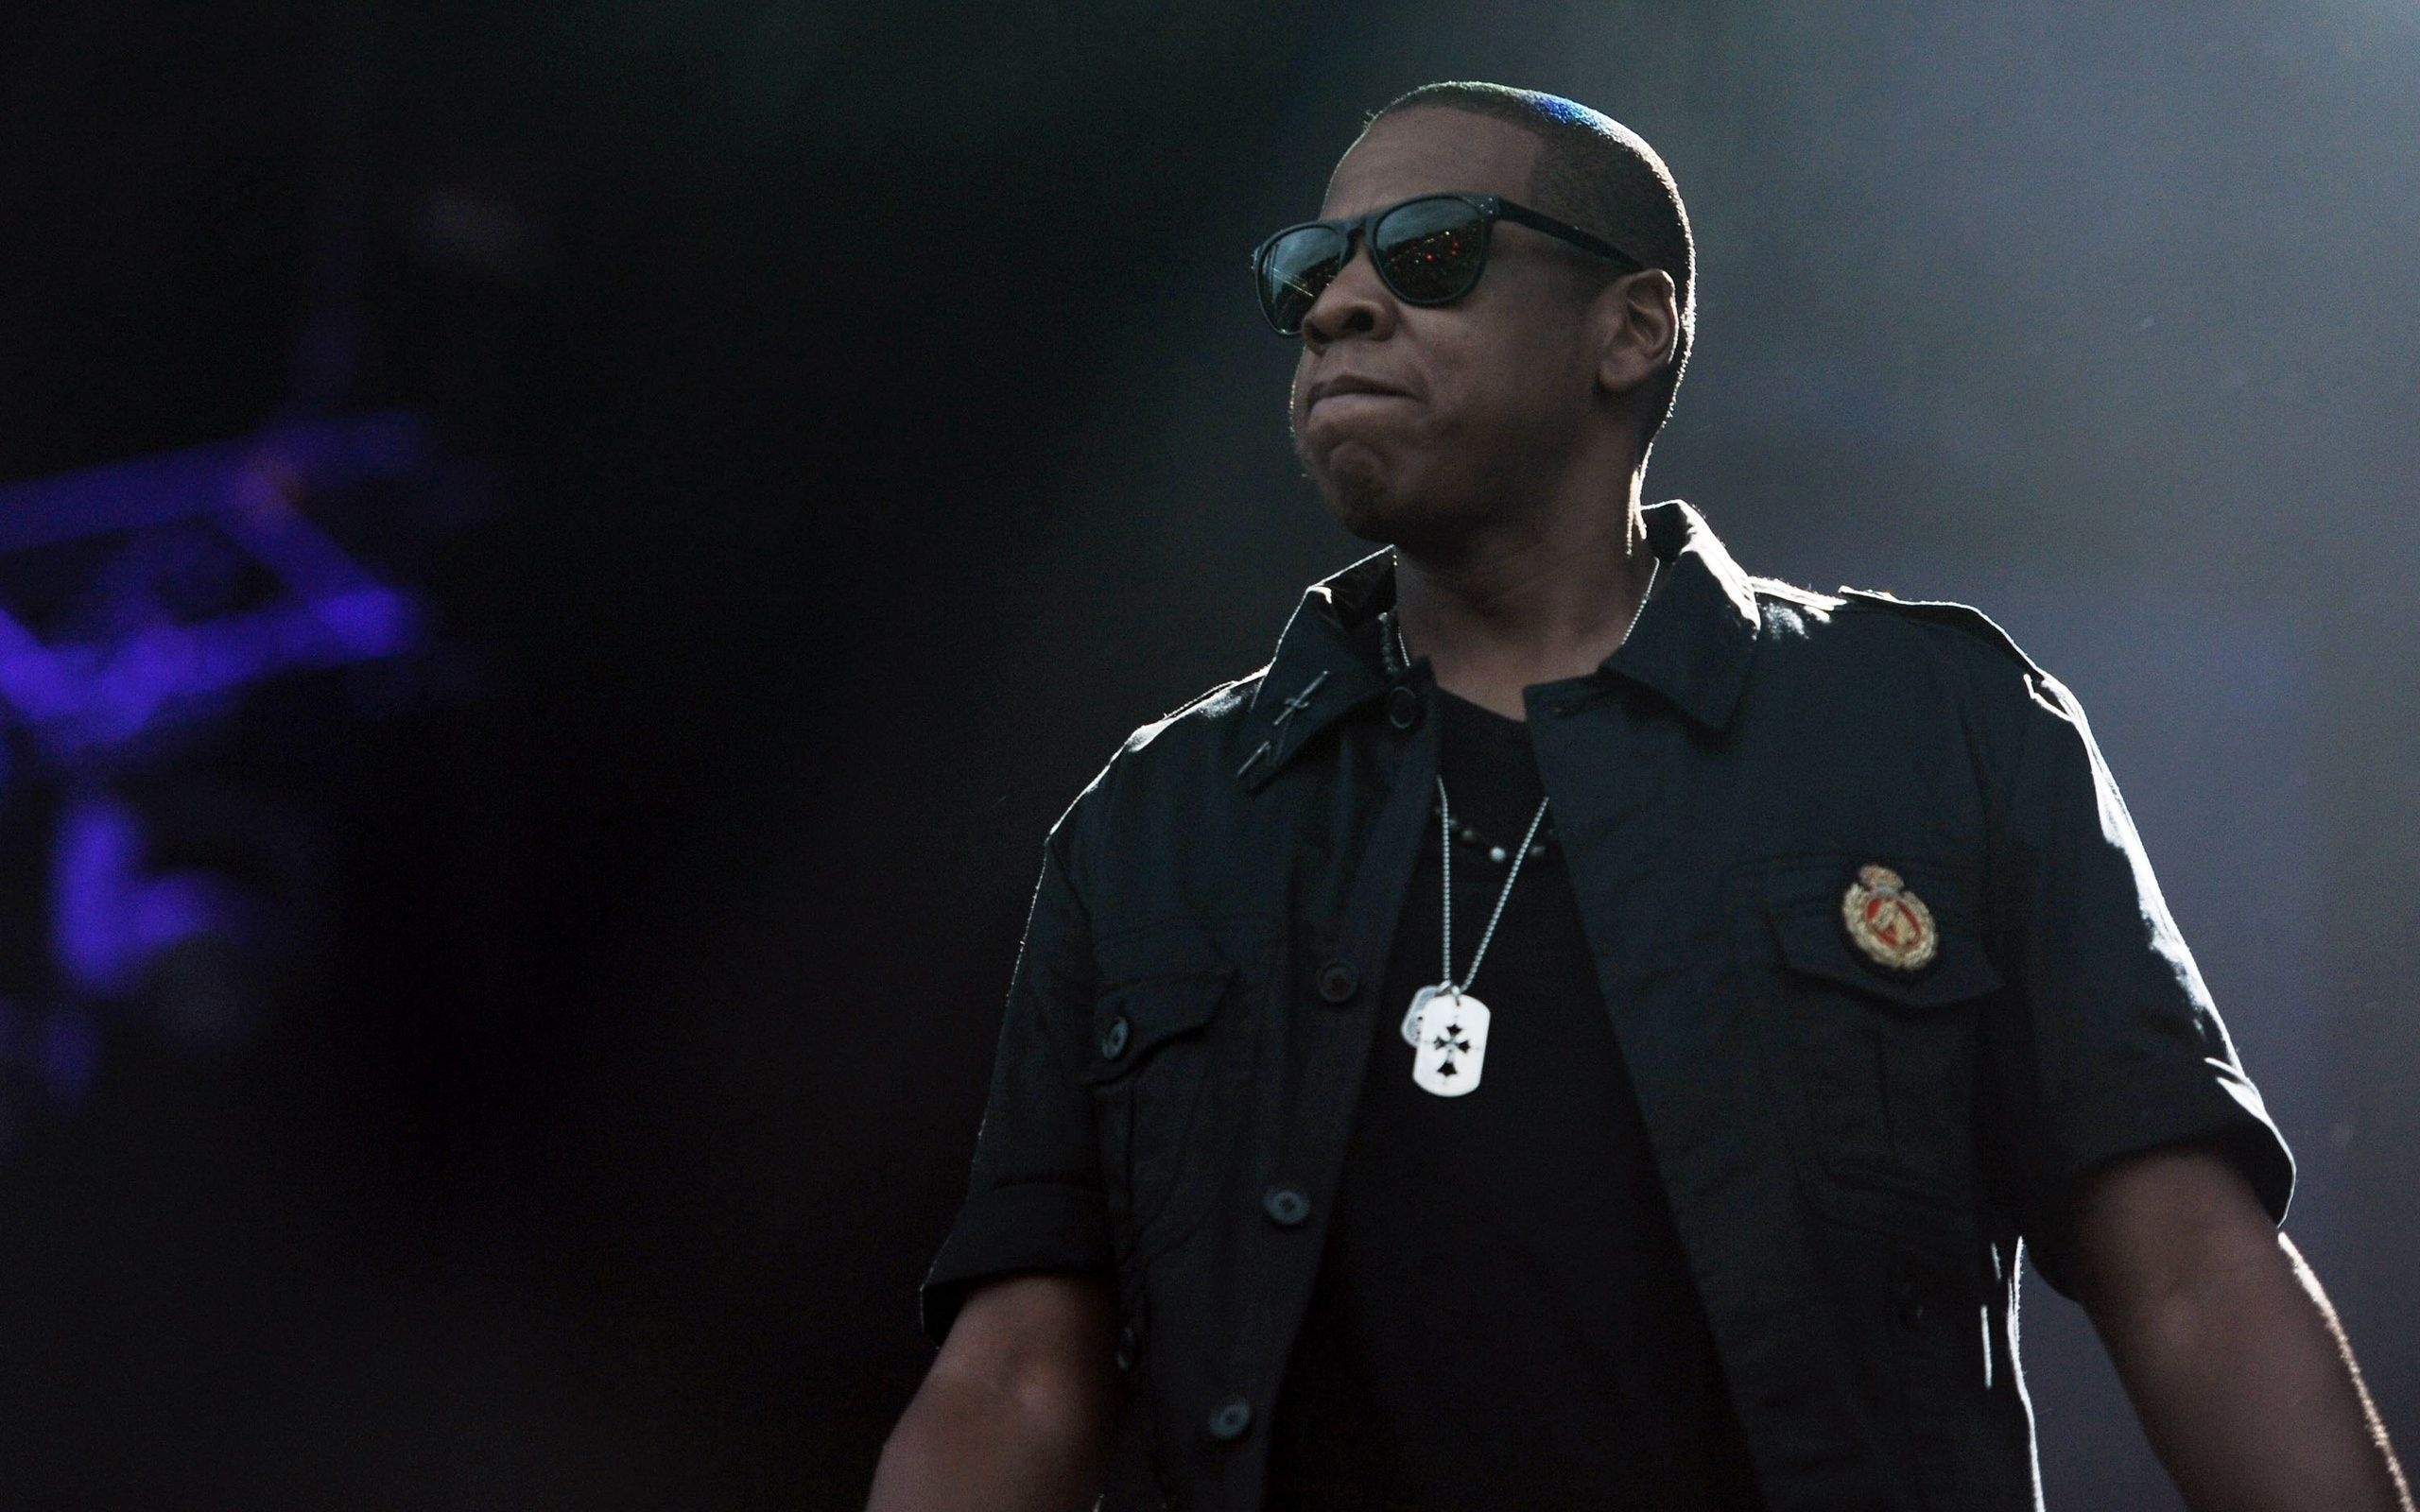 Jay-Z wallpapers, Stylish rapper, Celebrity images, Wallpaper collection, 2560x1600 HD Desktop